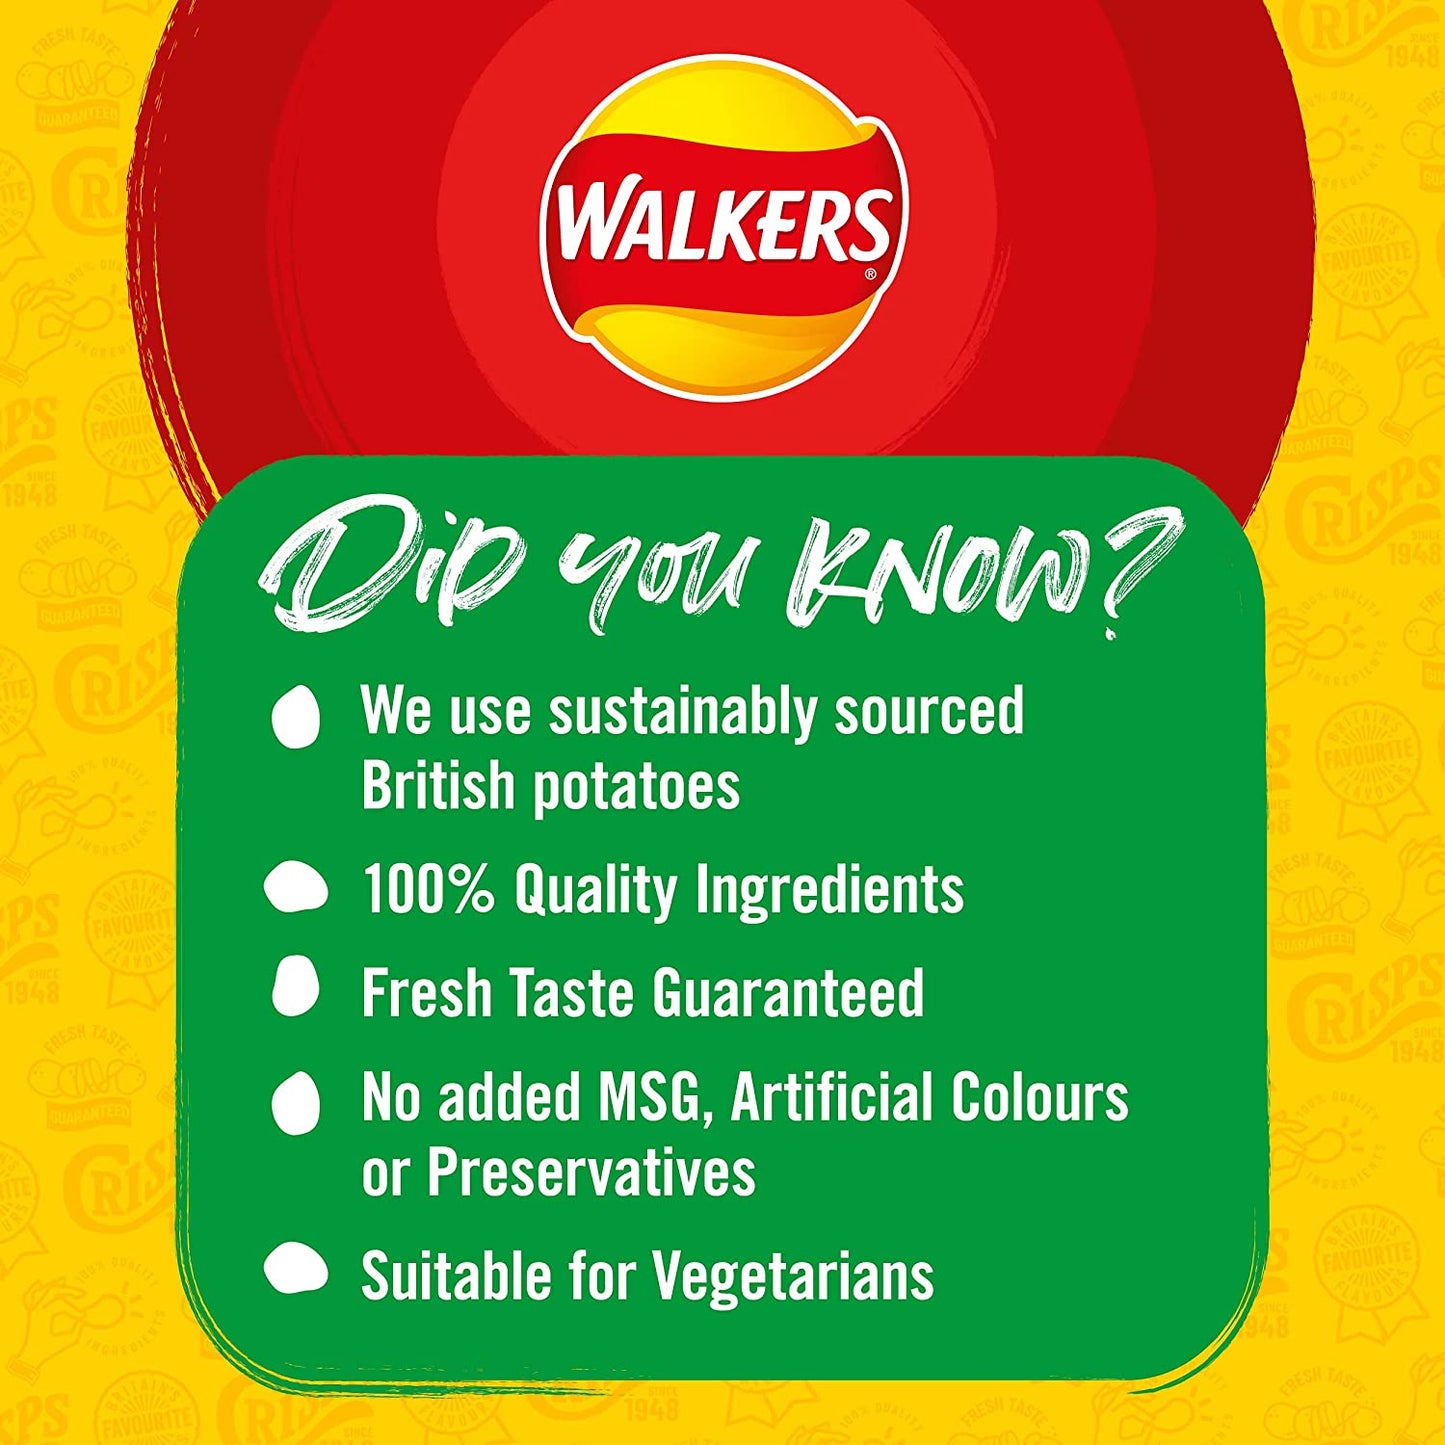 Walkers Crisps Cheese & Onion Pack 32's